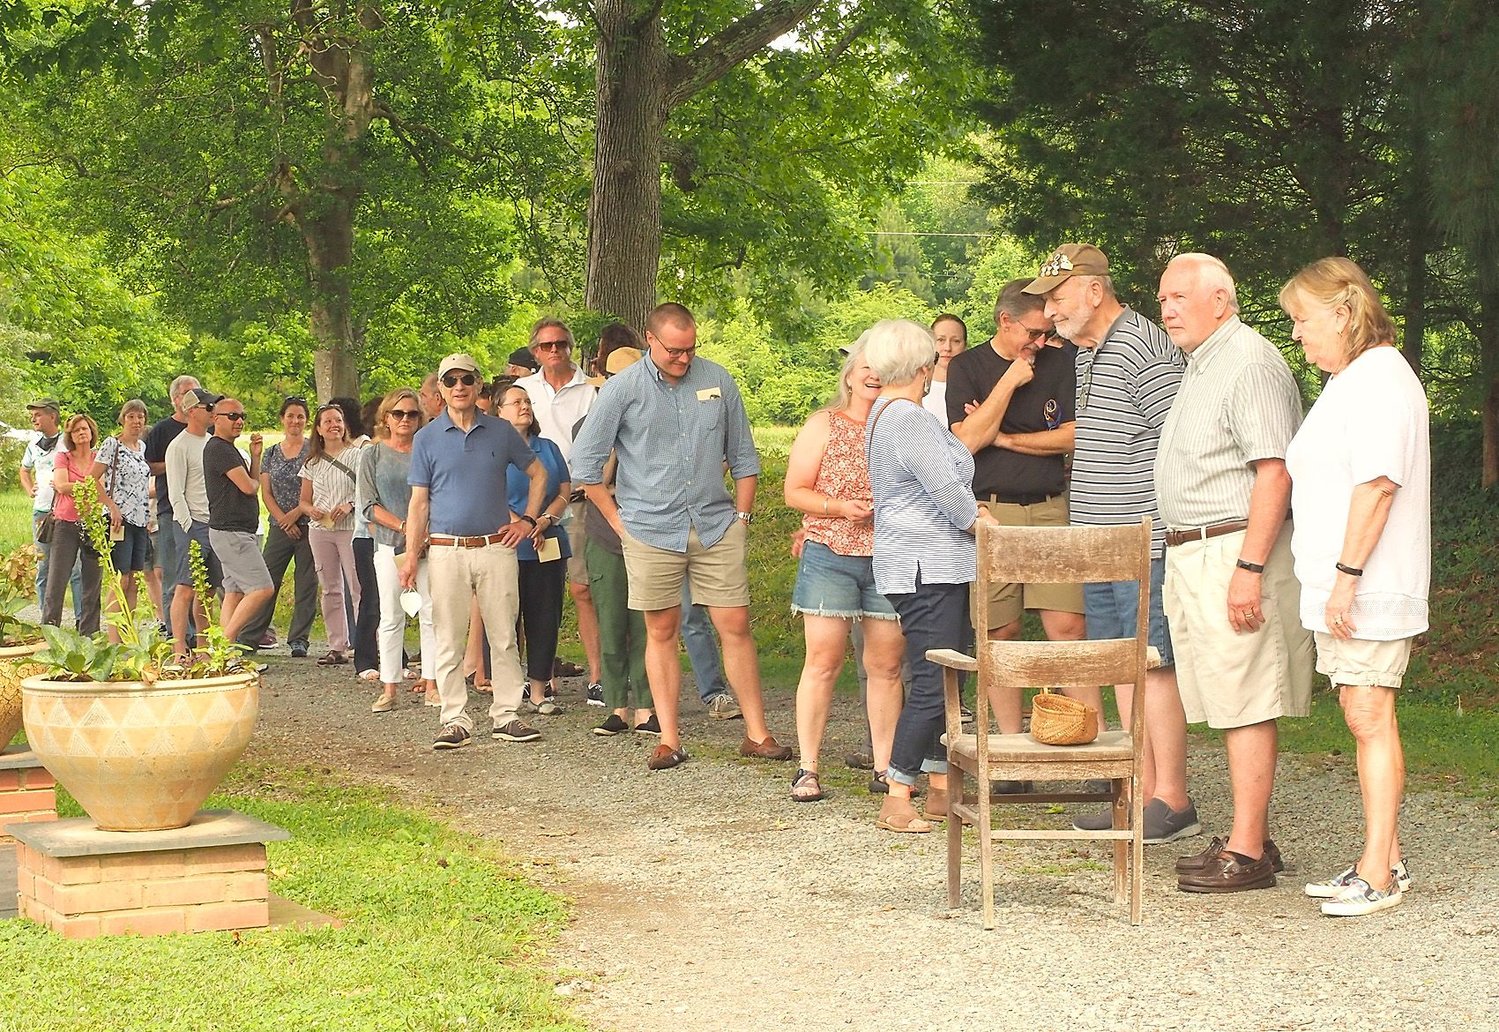 Local pottery Mark Hewitt’s first public kiln opening since the COVID-19 pandemic felt like a homecoming. Here, customers lined up on Johnny Burke Road in Pittsboro over the weekend to view pottery and purchase pieces.